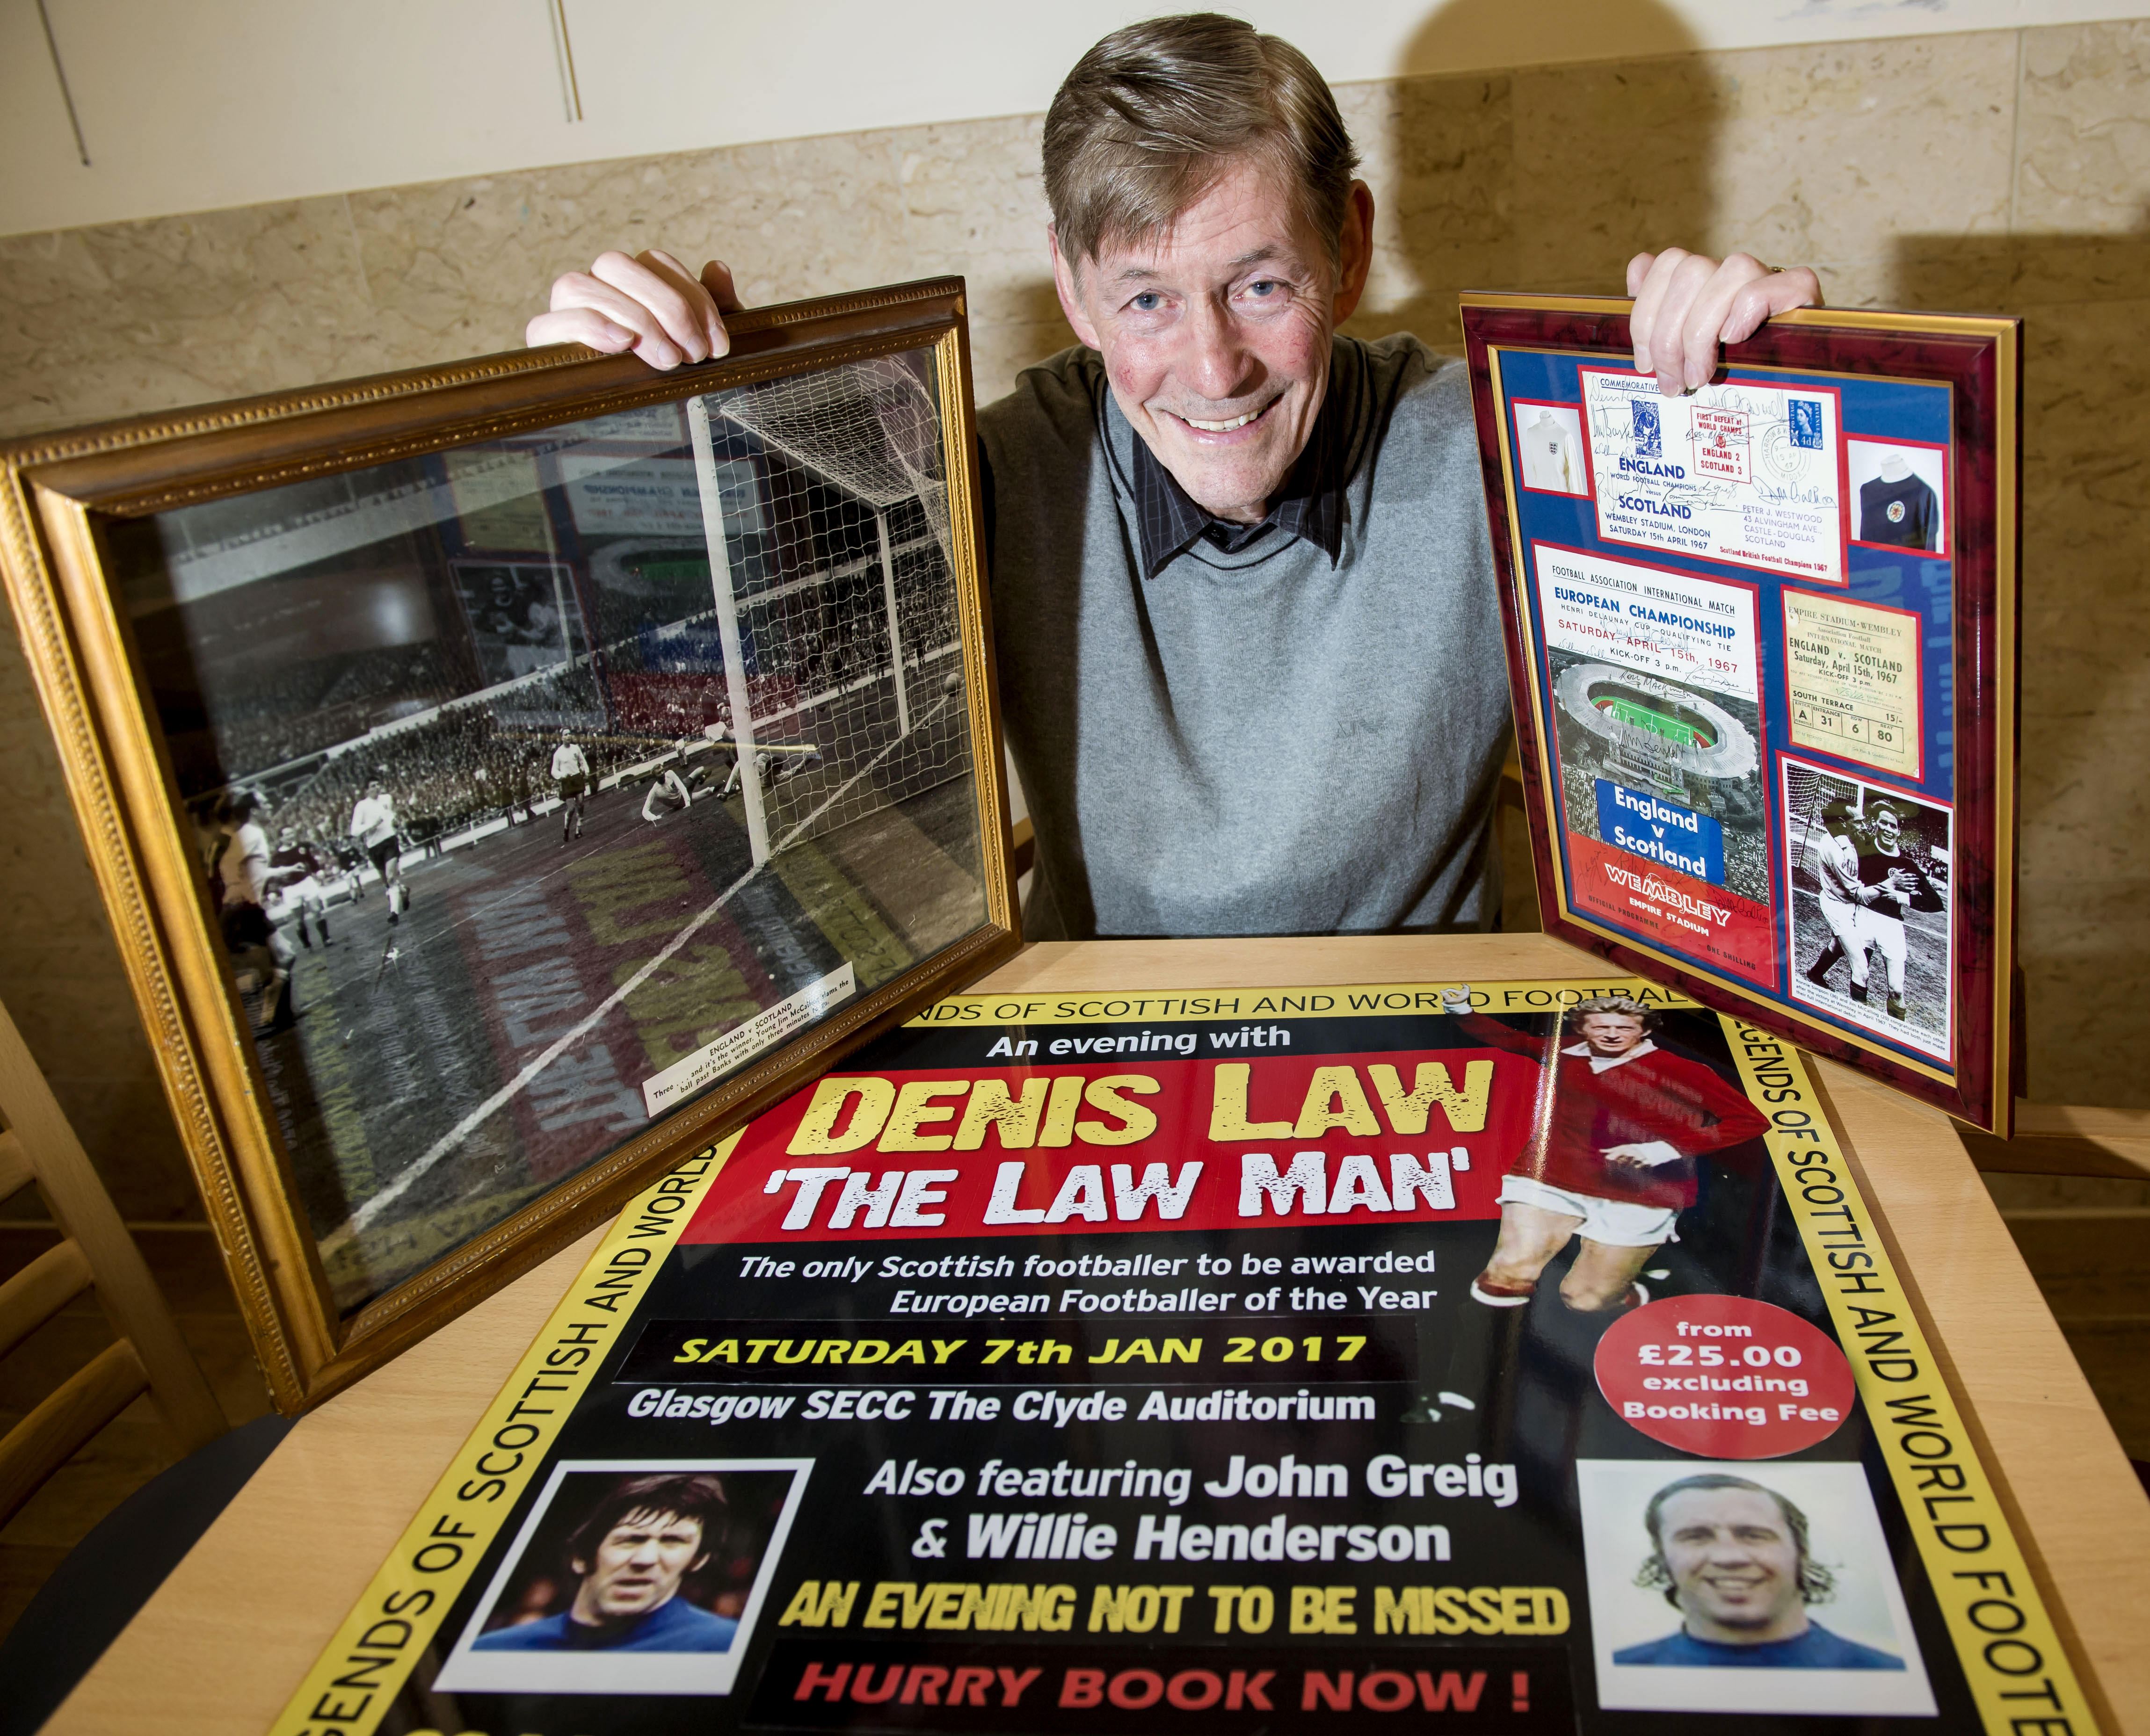 26/10/16 ROYAL CONCERT HALL - GLASGOW Jim McCalliog promoting the second Legends of Football event